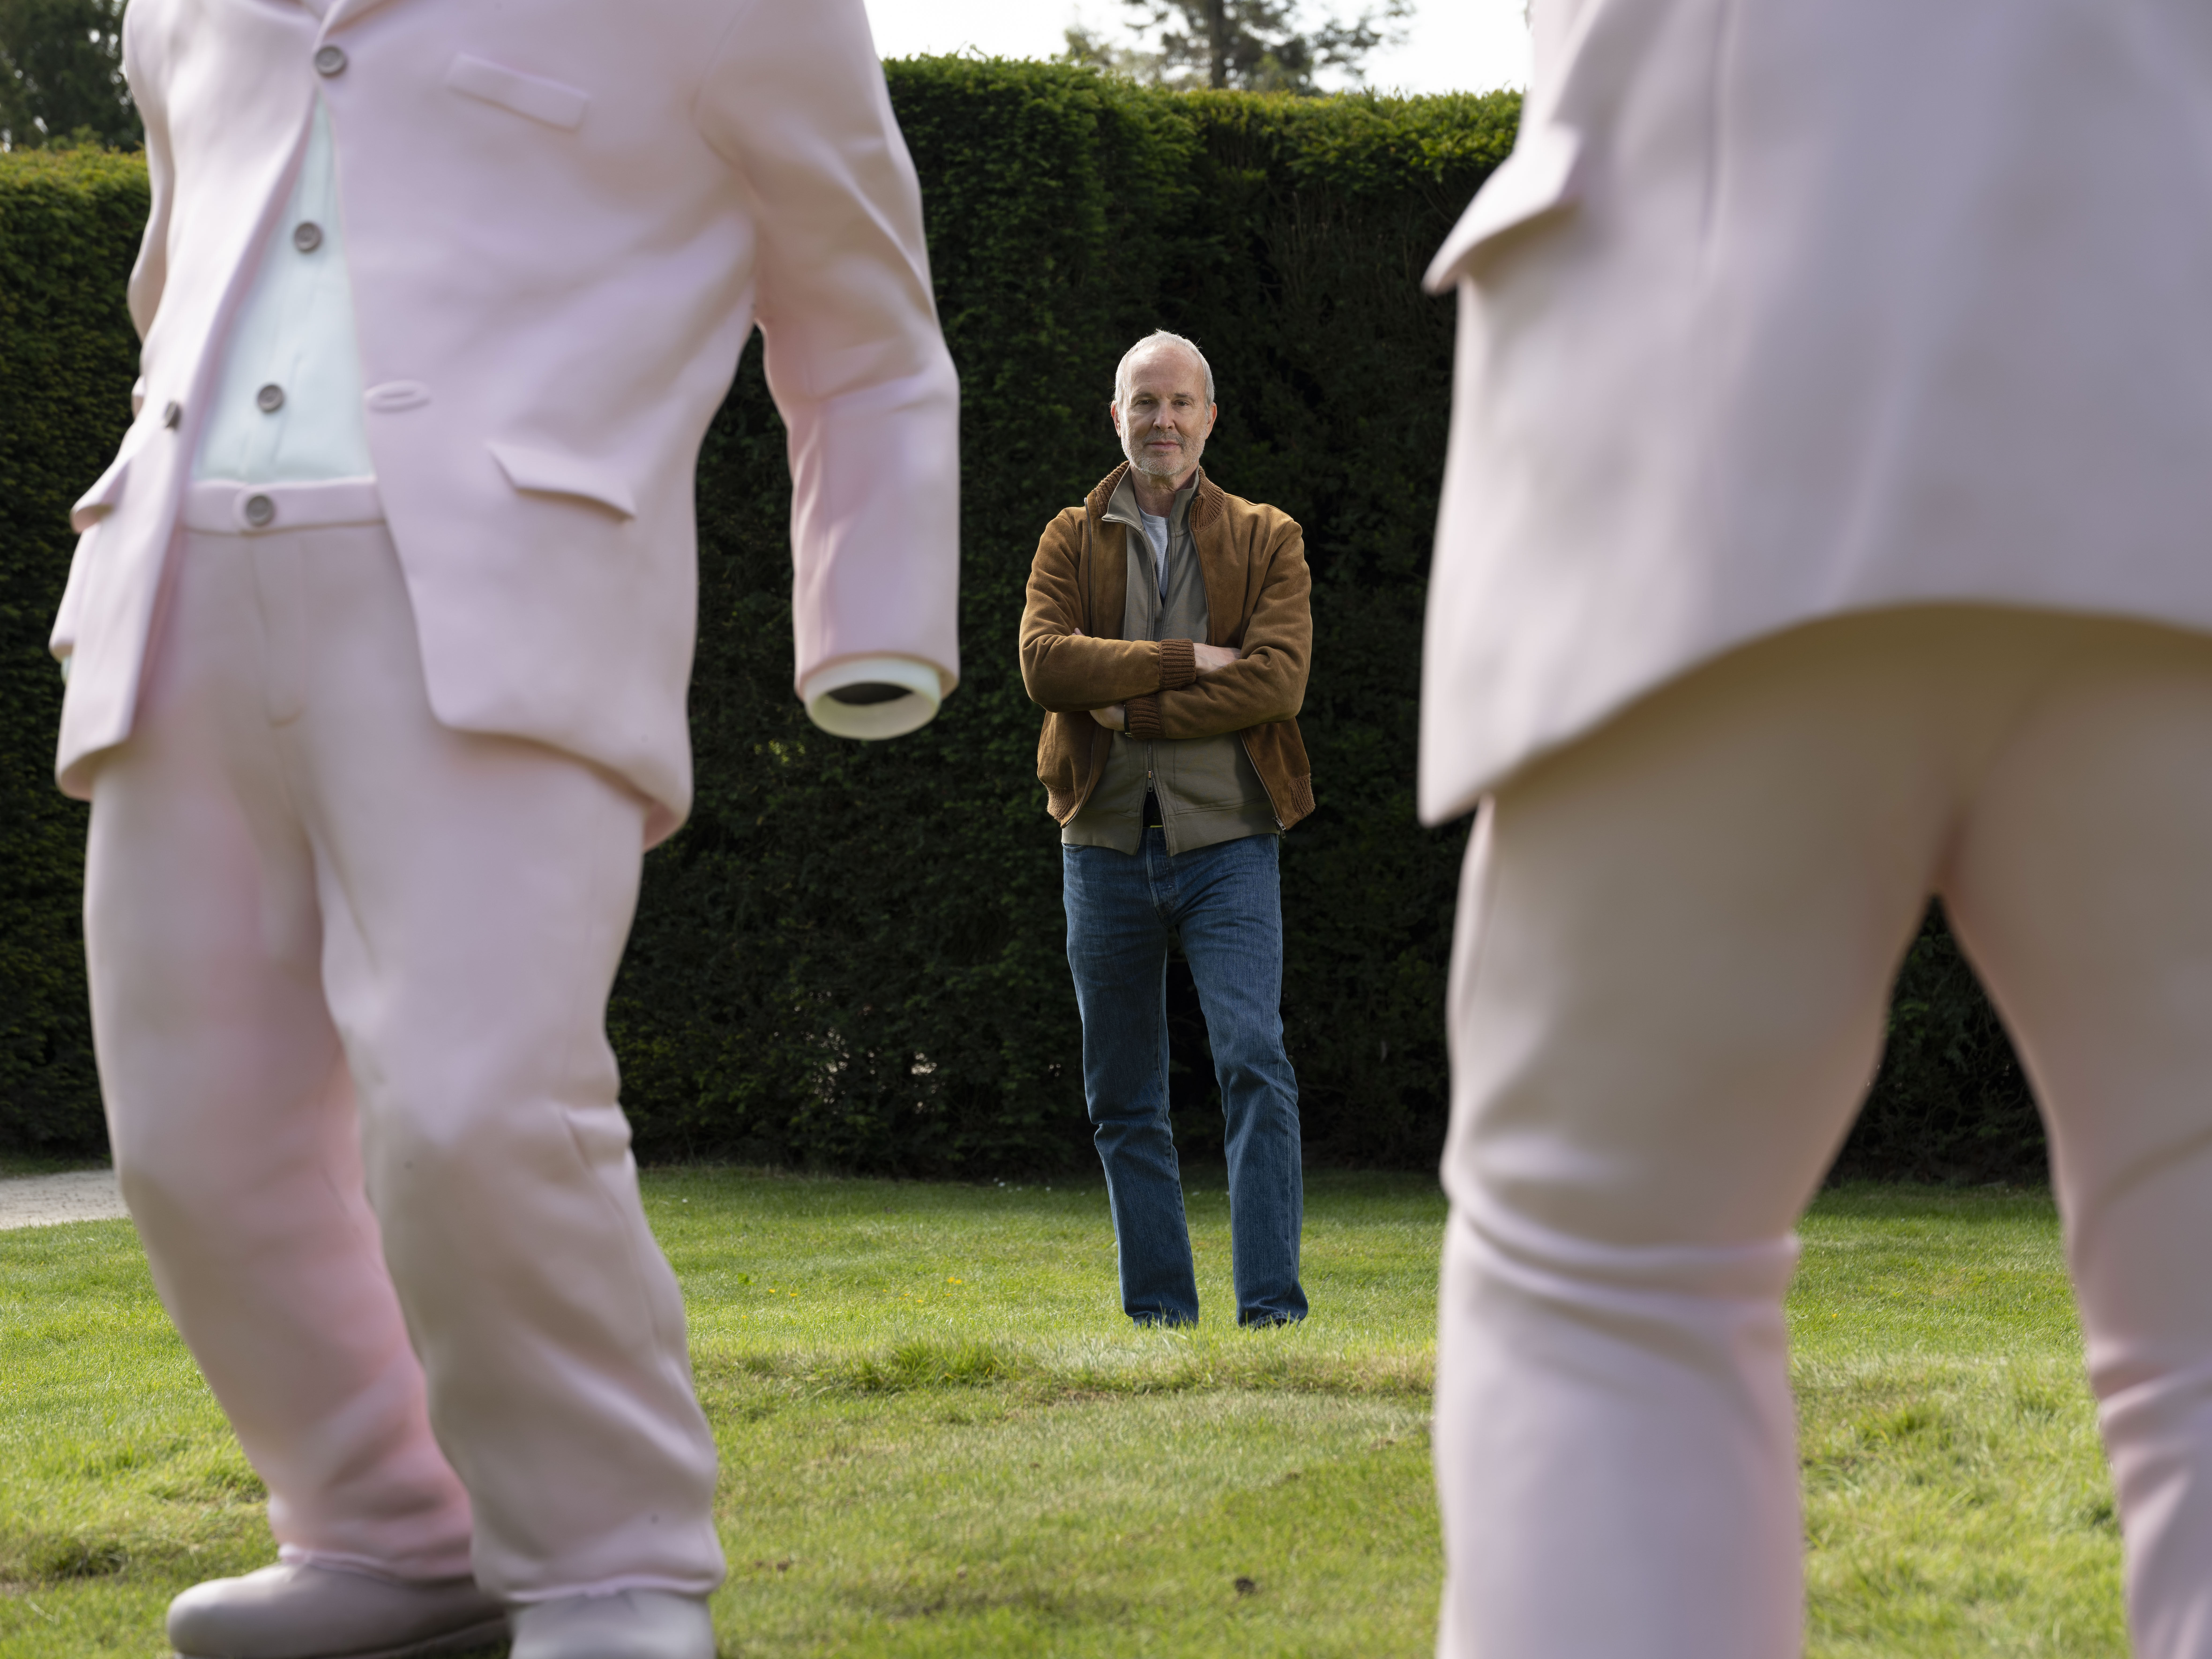 Man in the background, stood in between two pink sculptures of dancing suits